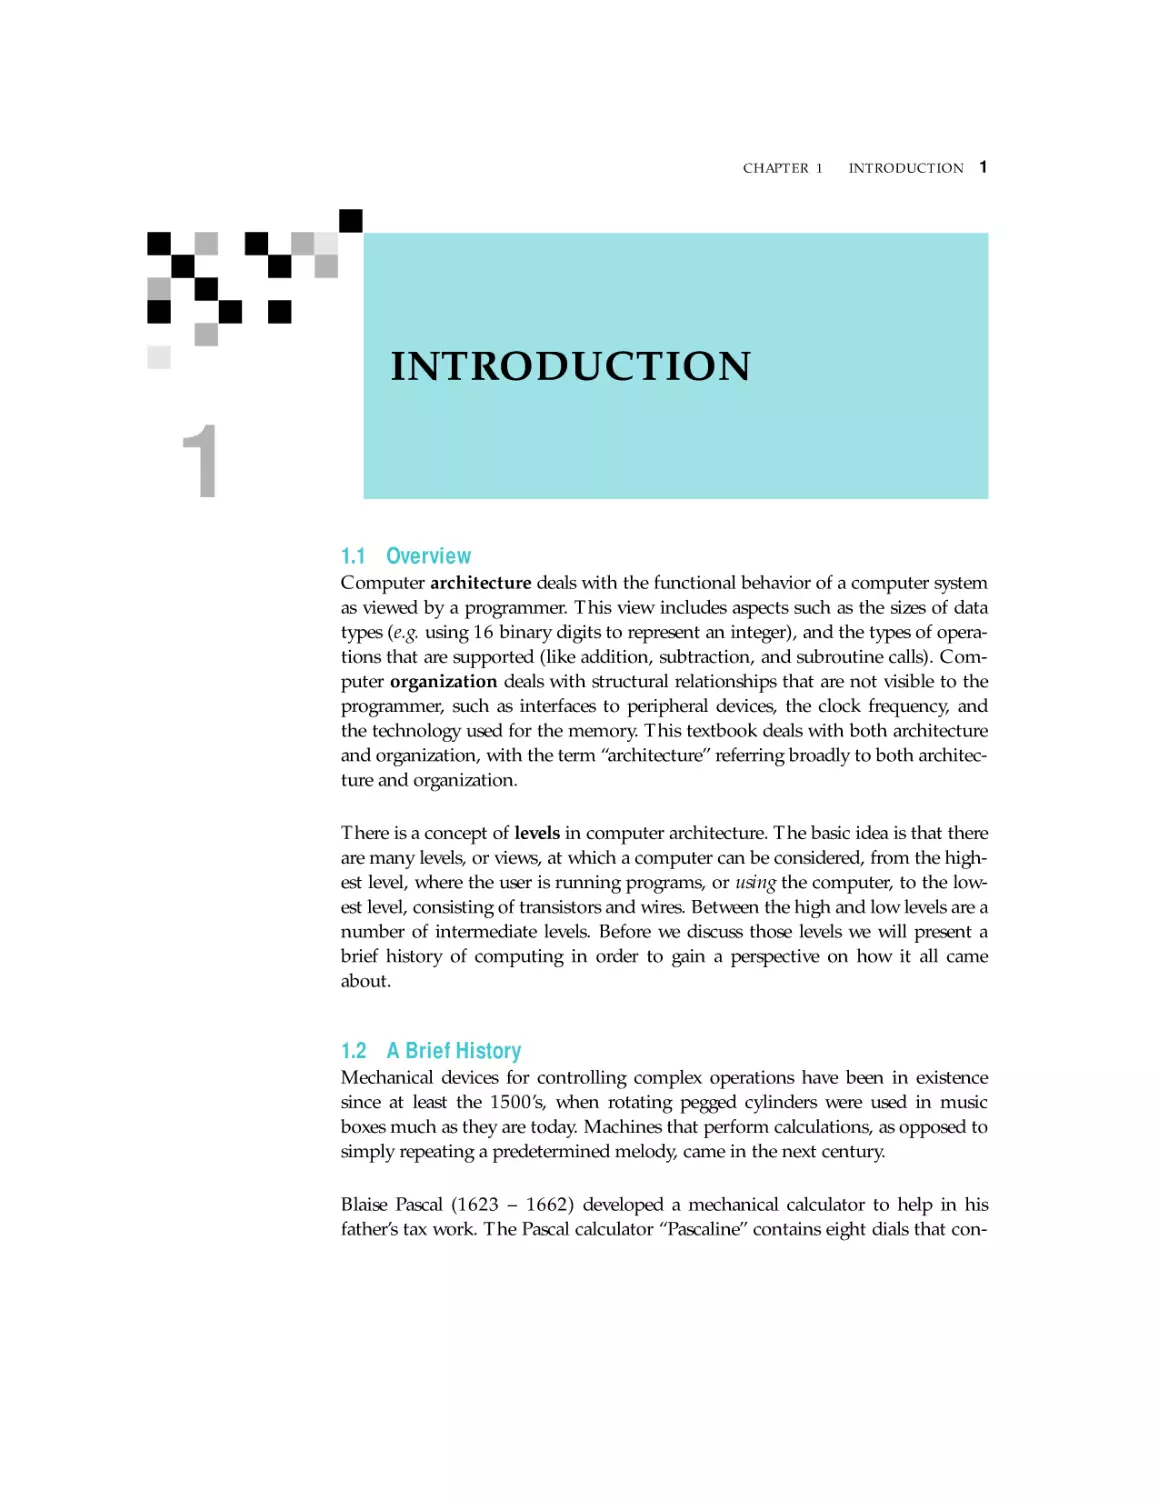 1. INTRODUCTION